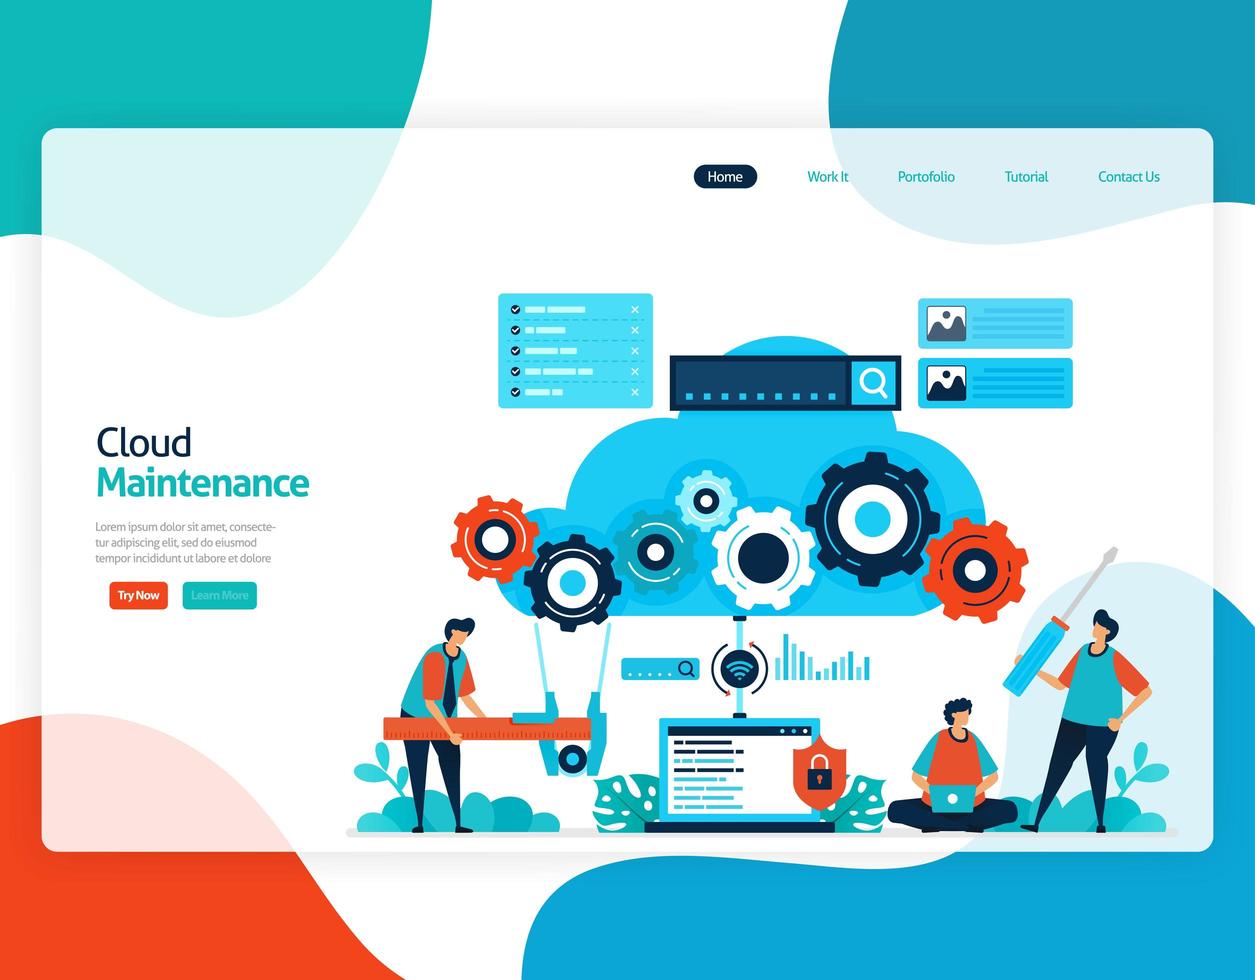 homepage landing page vector flat illustration of cloud maintenance. repair and maintenance of cloud storage technology. security system in digital backup database. web, flyer, website, mobile apps